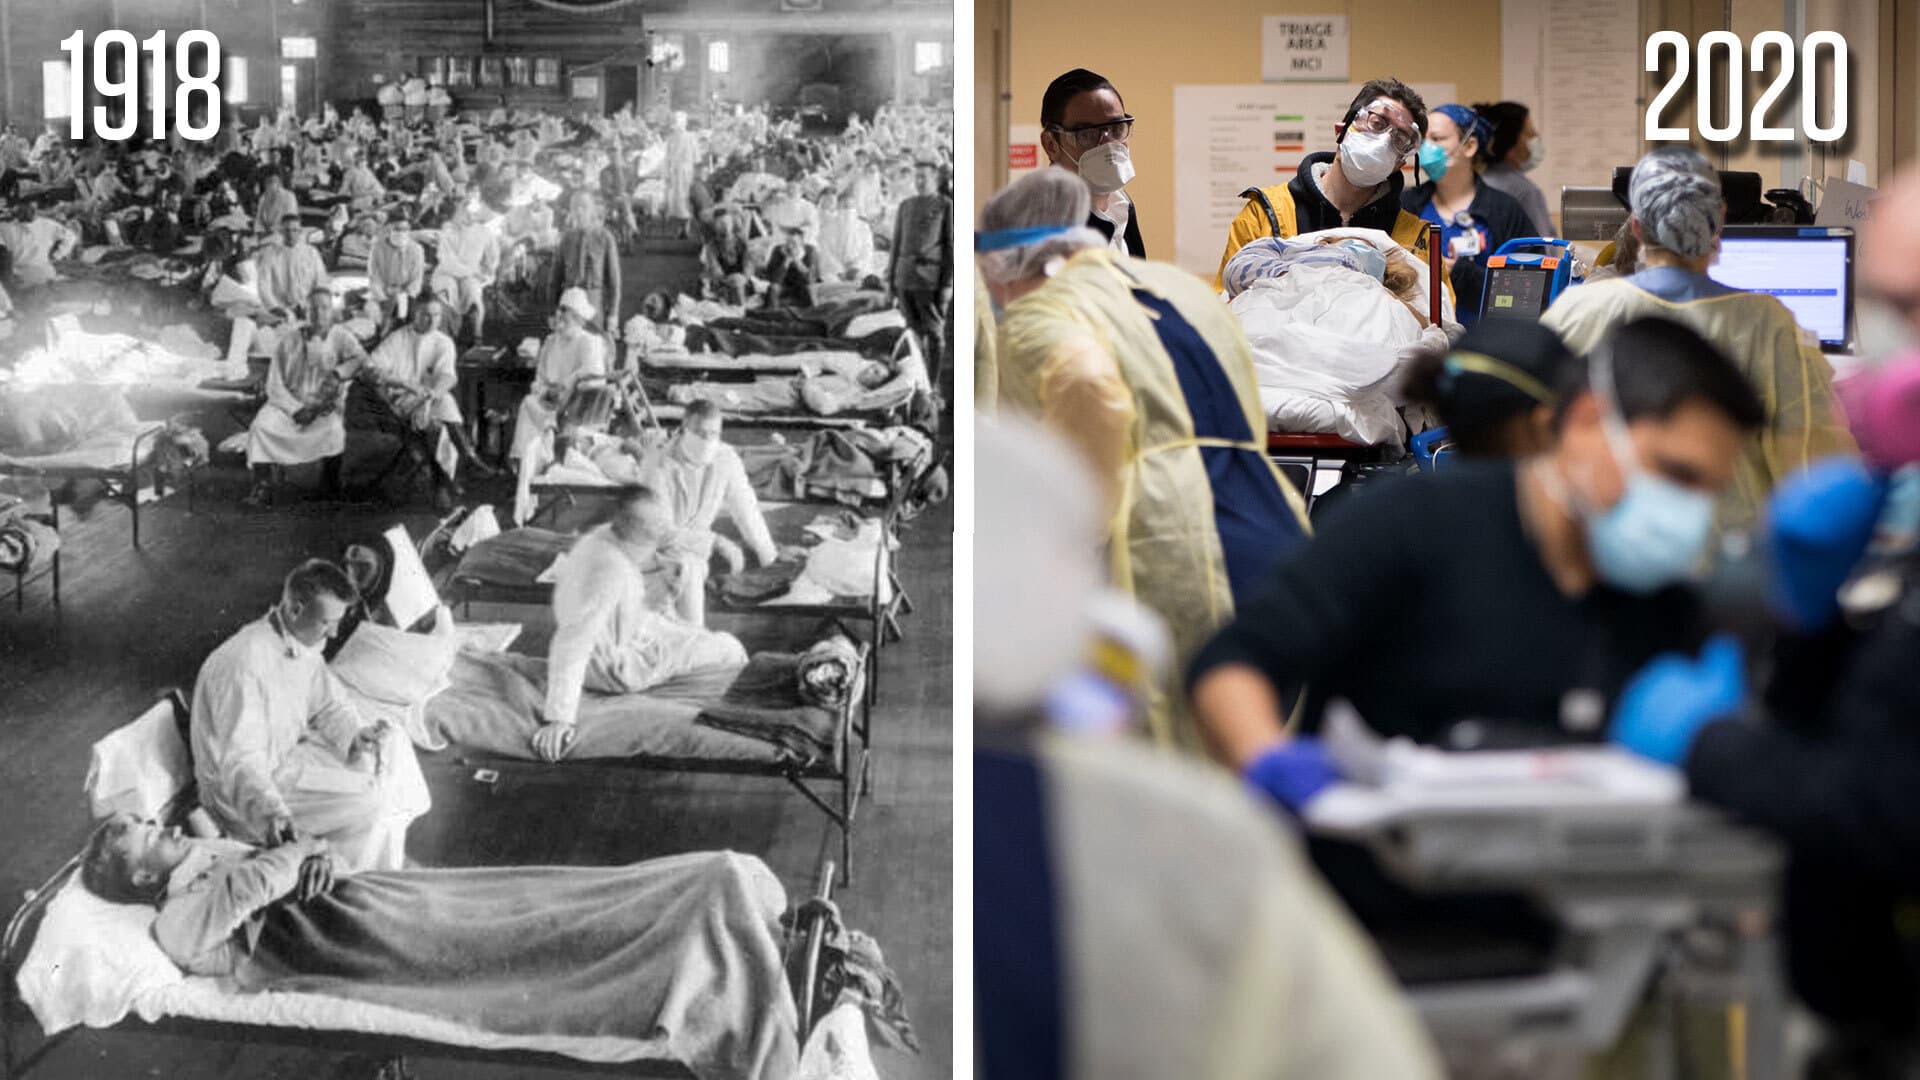 Flu patients convalesce in a makeshift Kansas hospital (left), while emergency medical personnel scurried to provide care as coronavirus victims overflow into a hallway in a New York hospital in April.